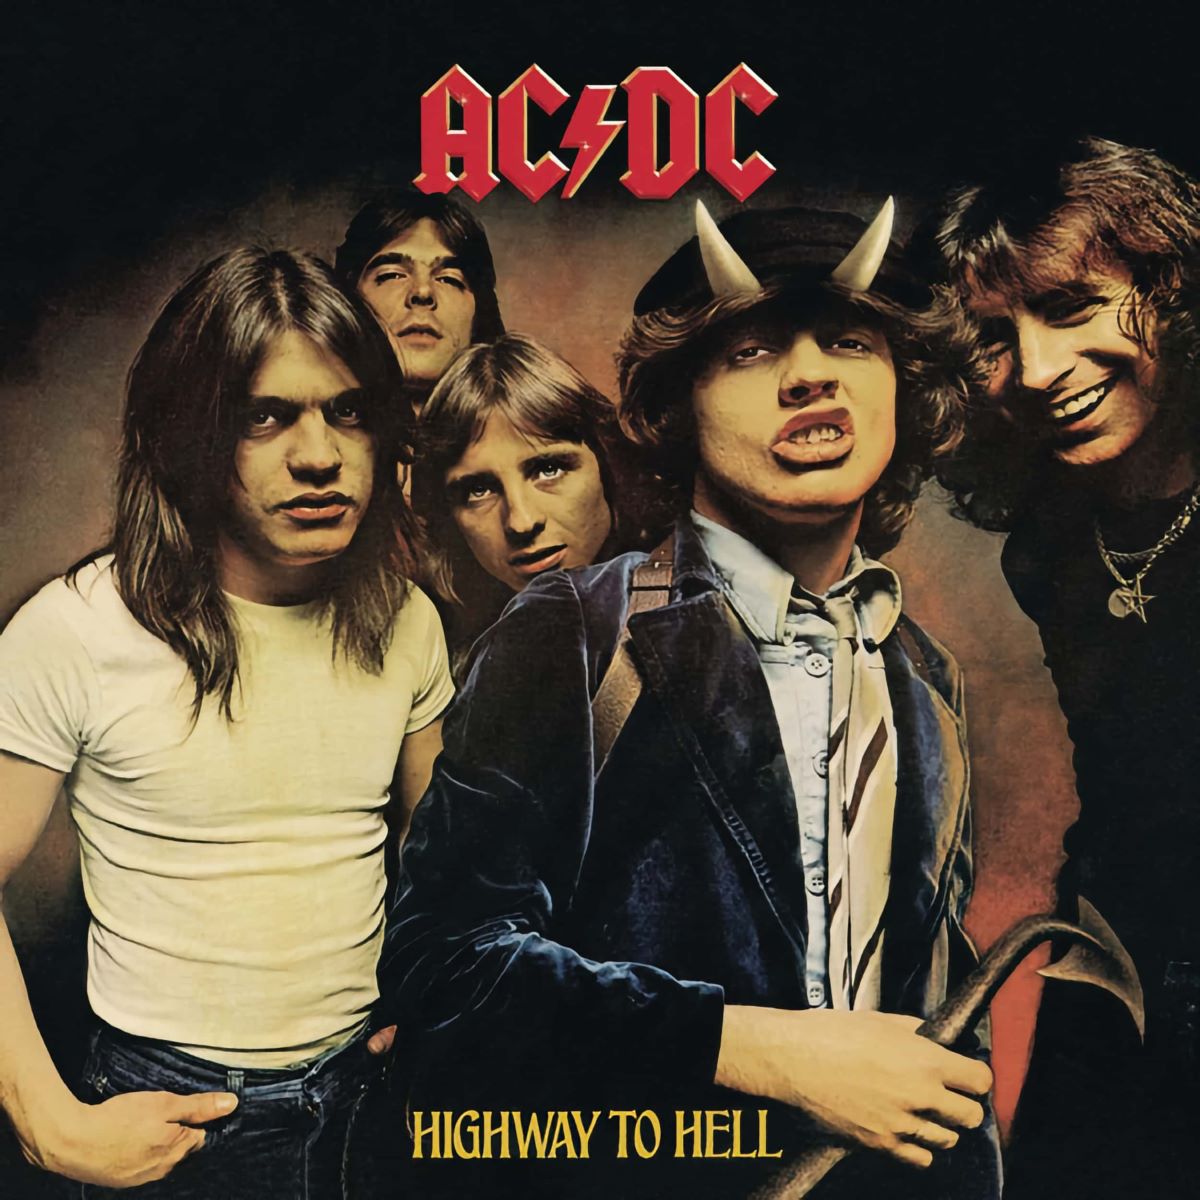 How To Play AC/DC’s “Highway To Hell” On Drums